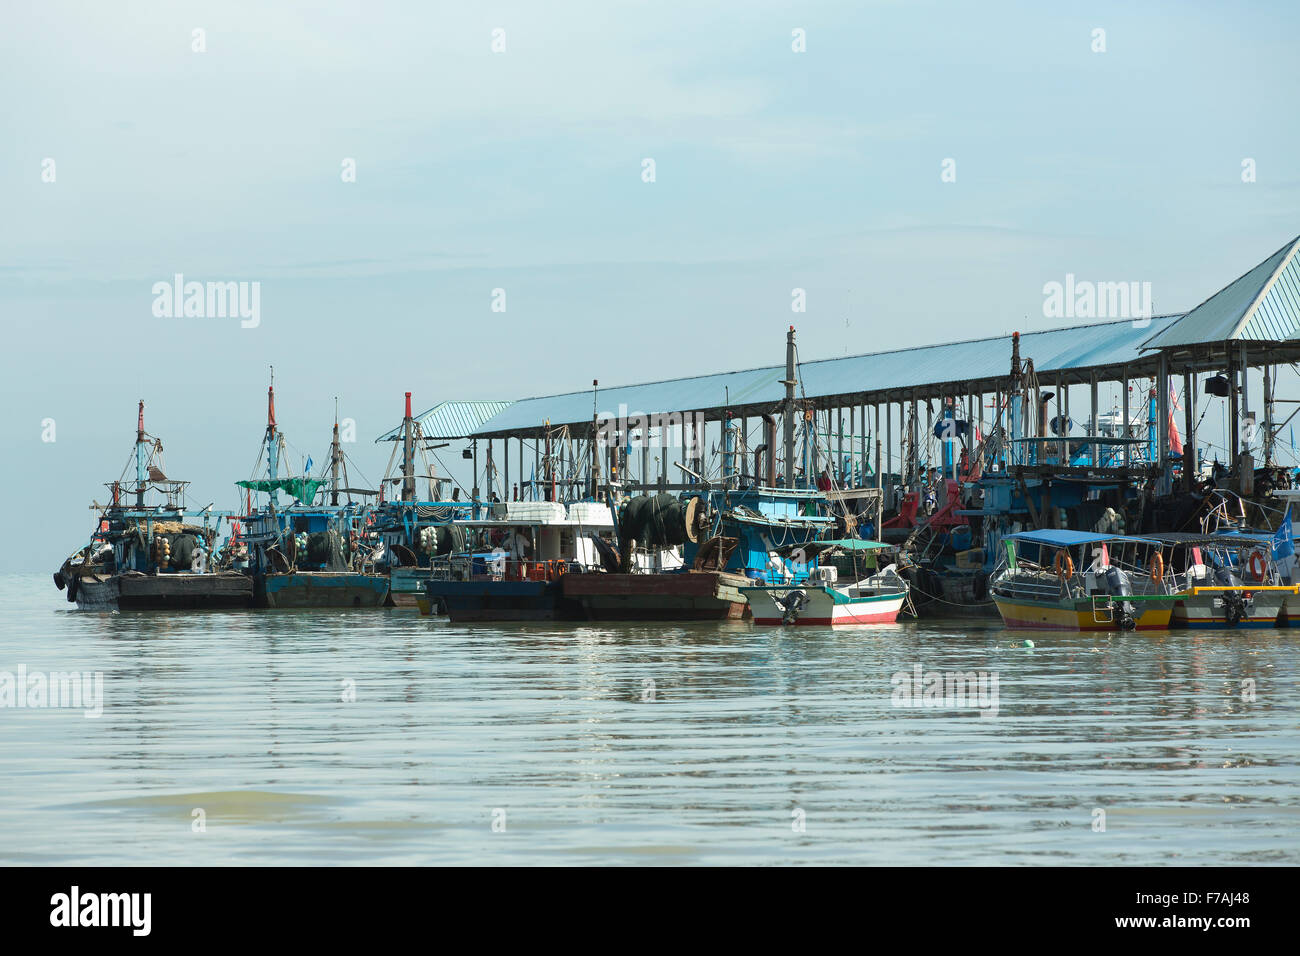 Collection of fishing boats alongside an old jetty at Teluk Bahang in Penang Malaysia. Stock Photo